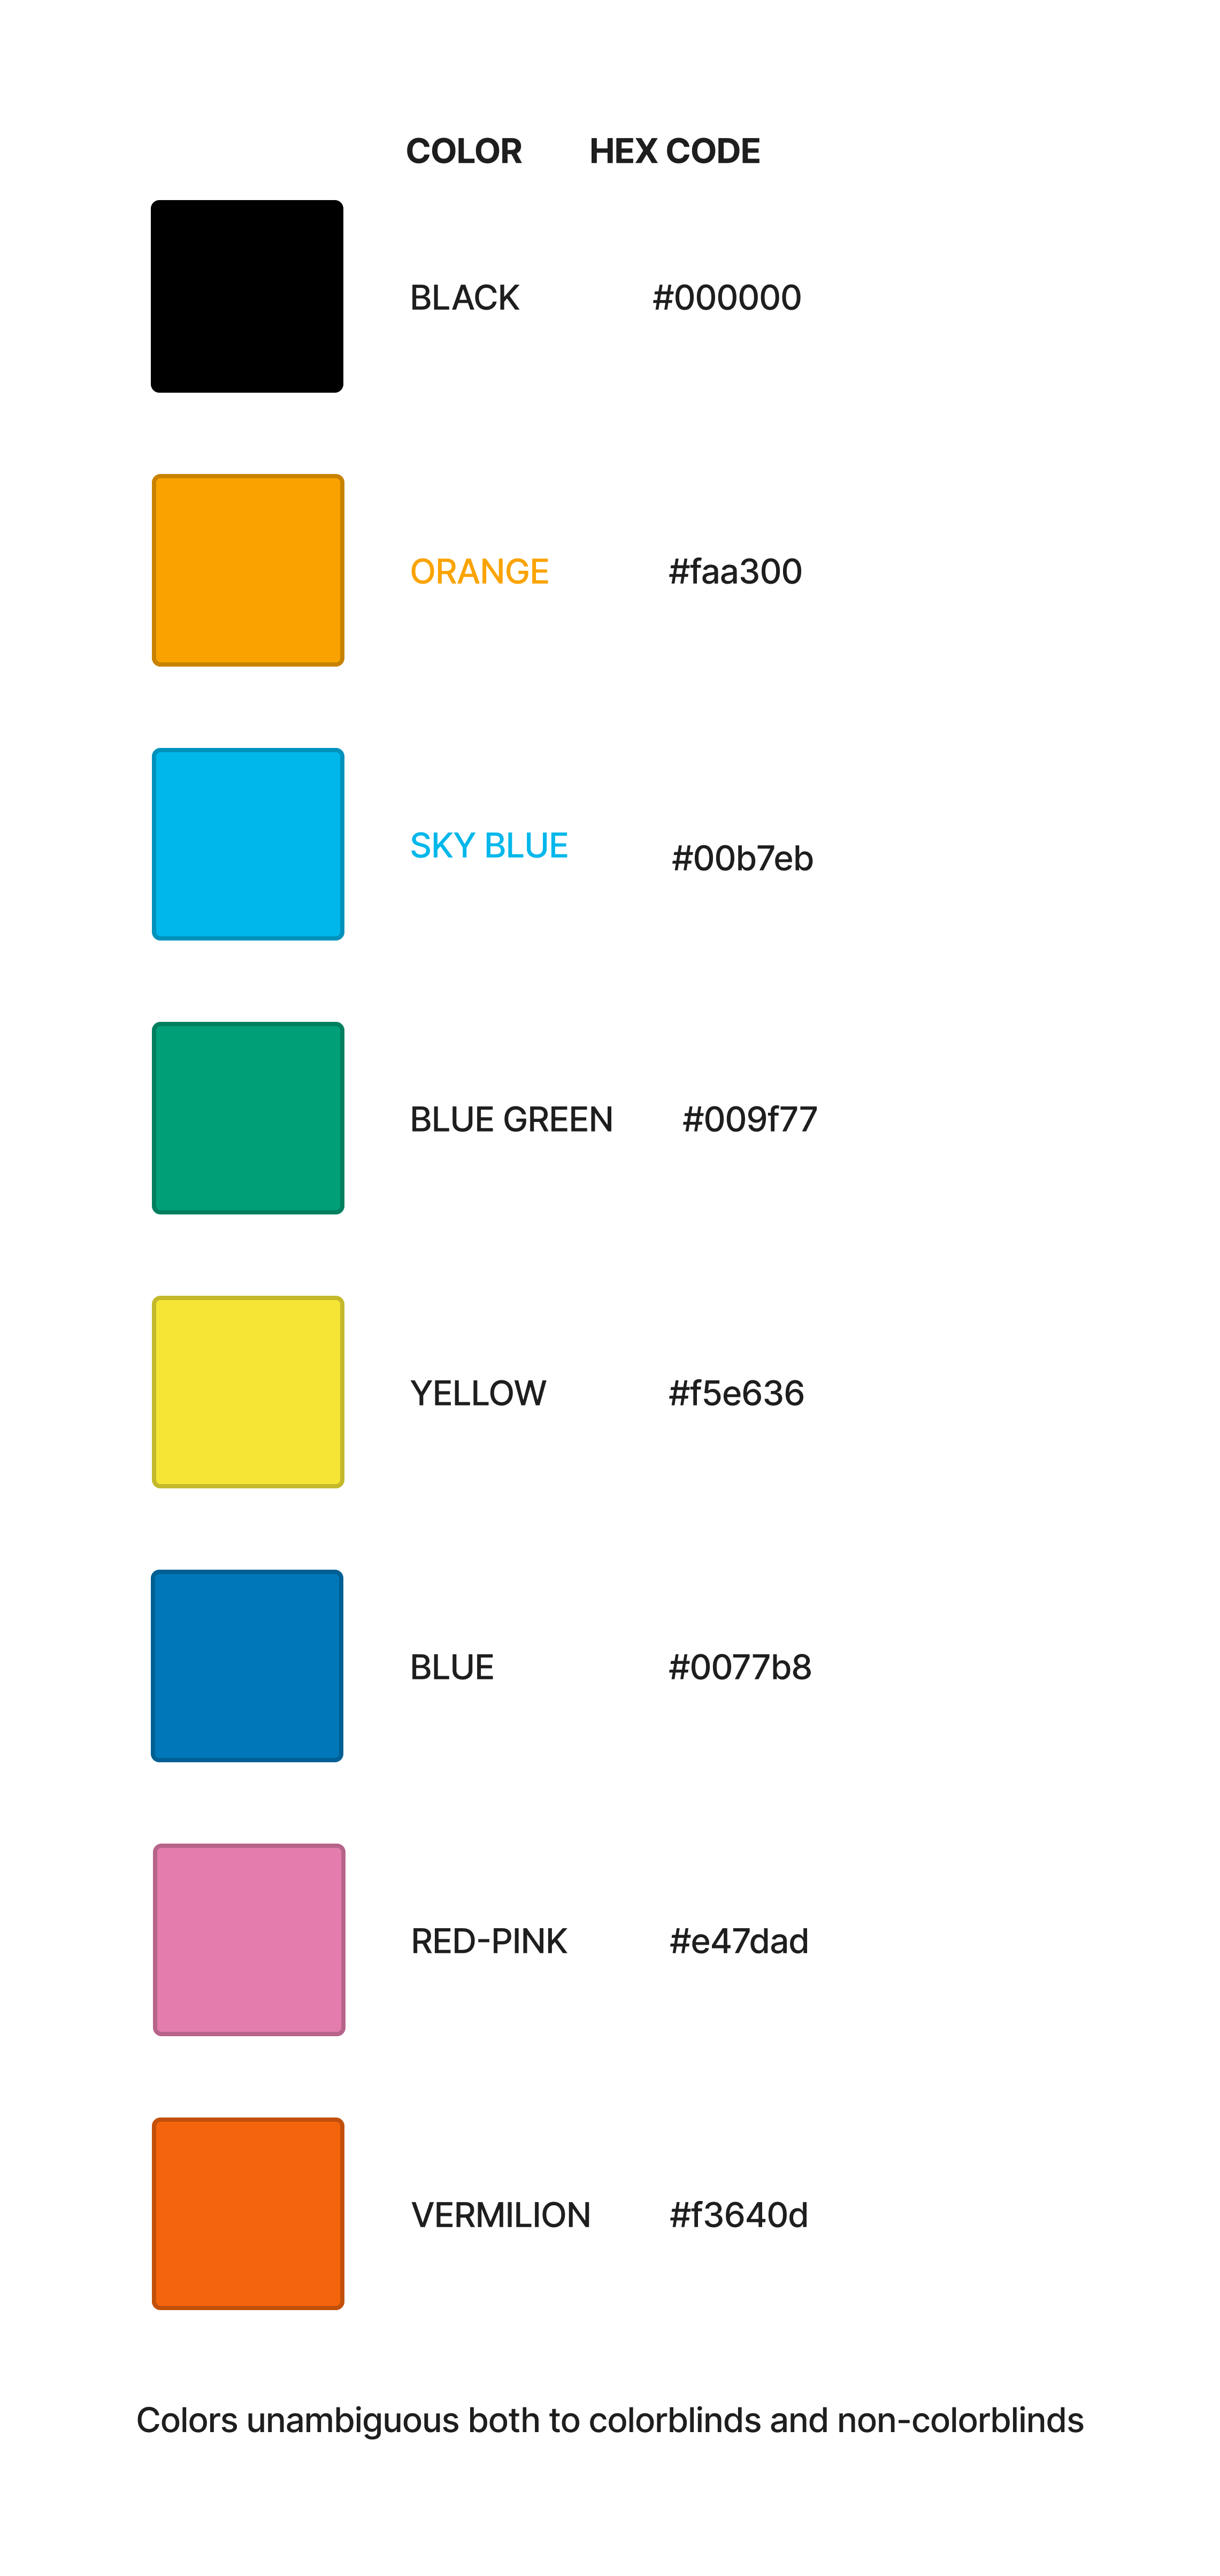 A list of colors with their hex codes designed to be distinguishable for colorblind readers